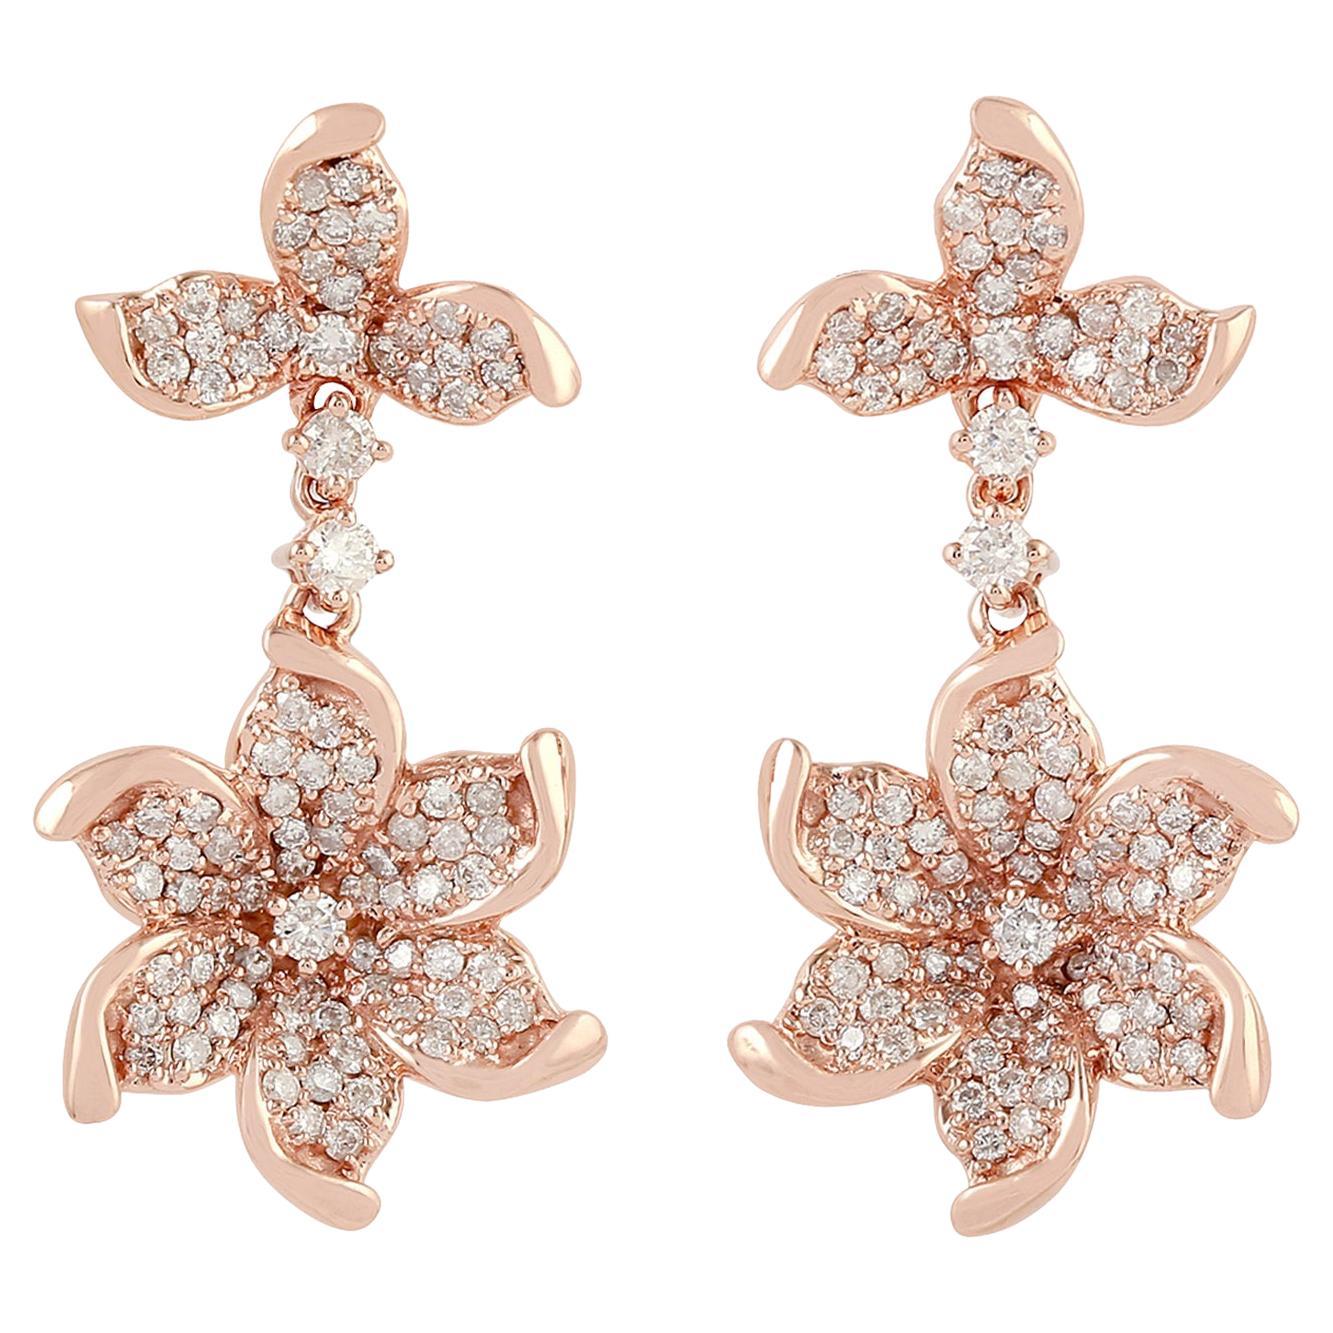 Designer Floral Pattern Earrings with Pave Diamonds Made in 18k Rose Gold